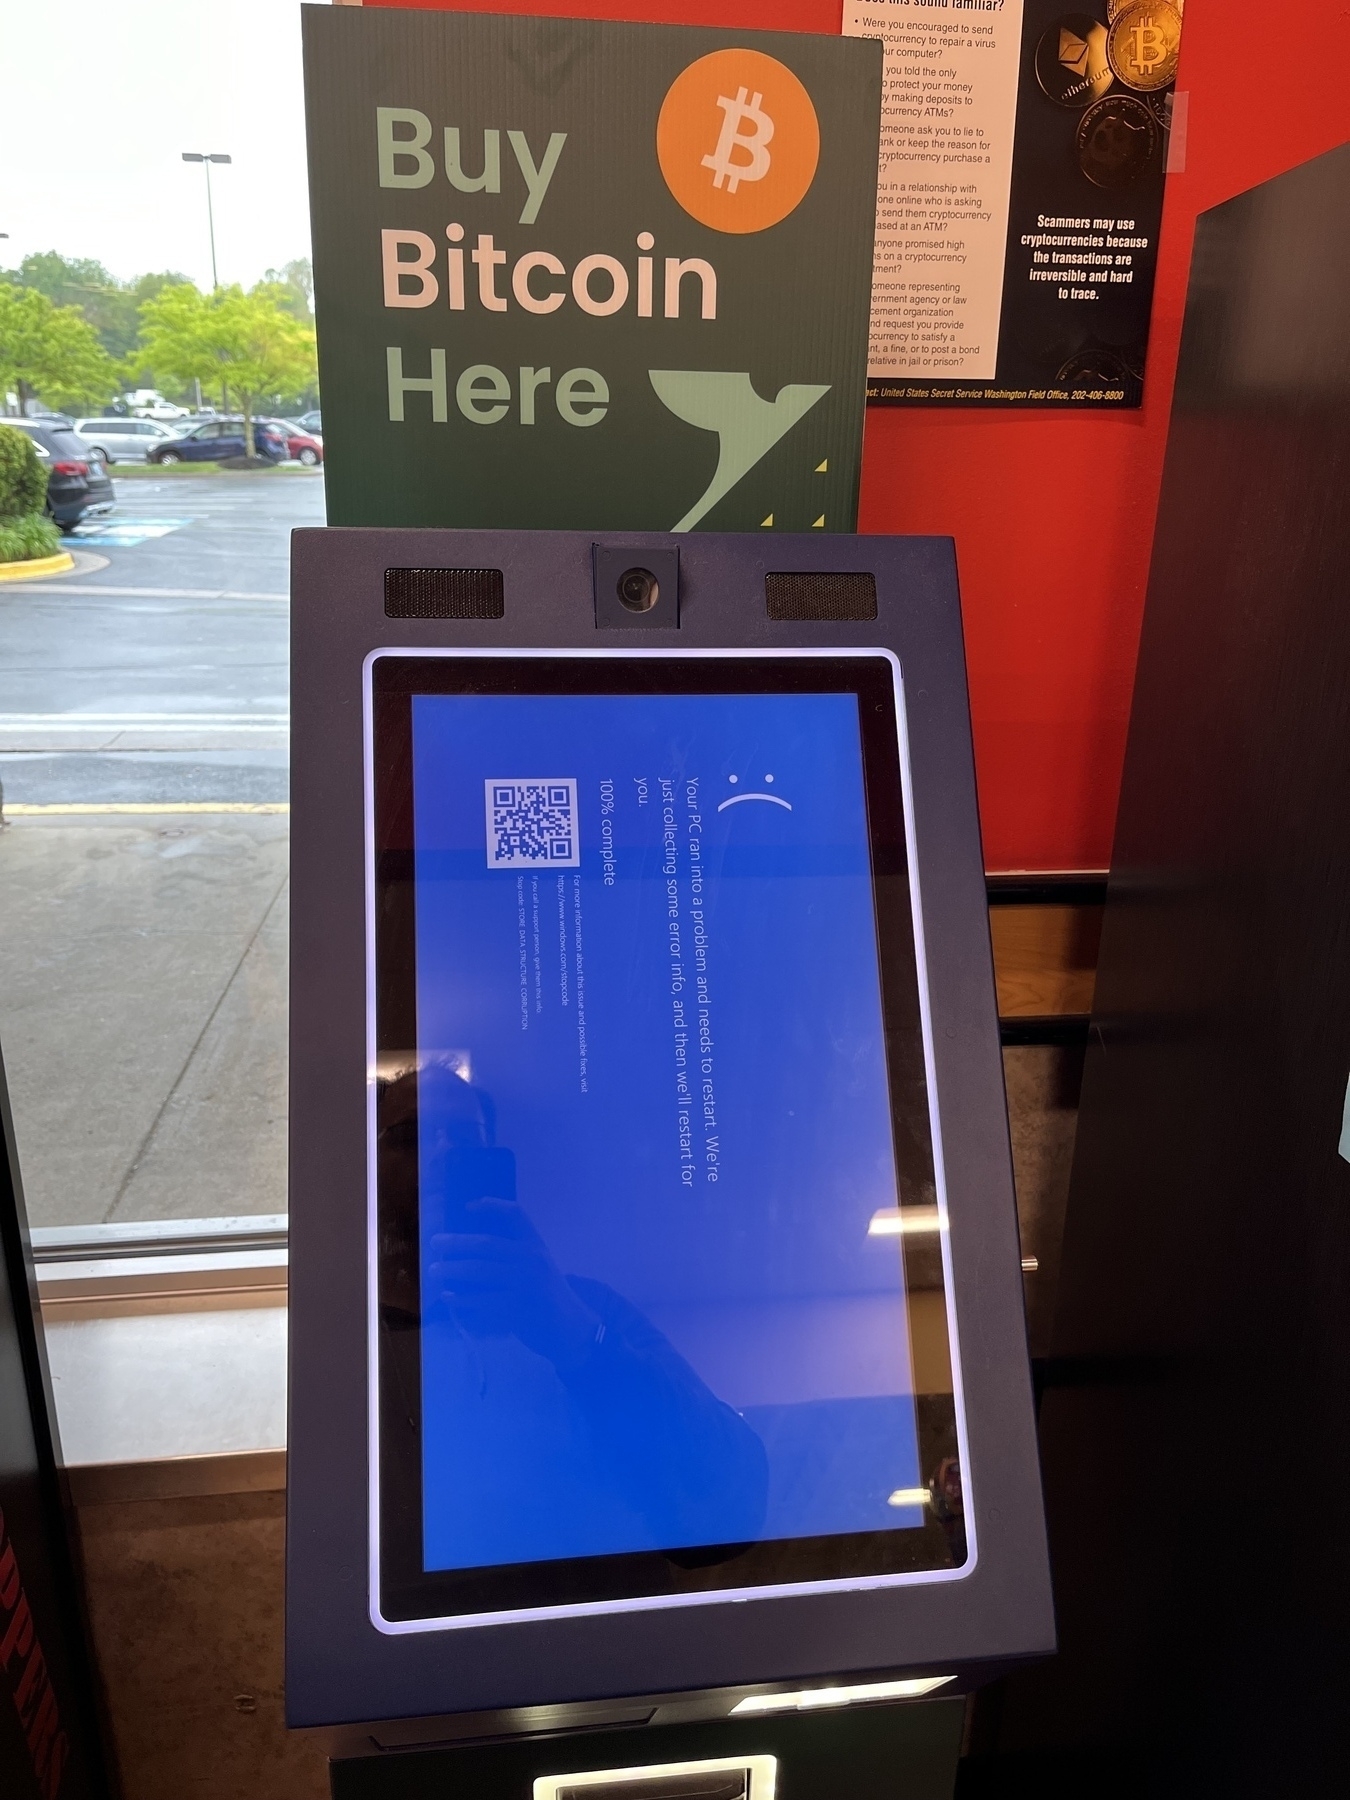 Buy bitcoin here kiosk with a Windows frowny face error.  